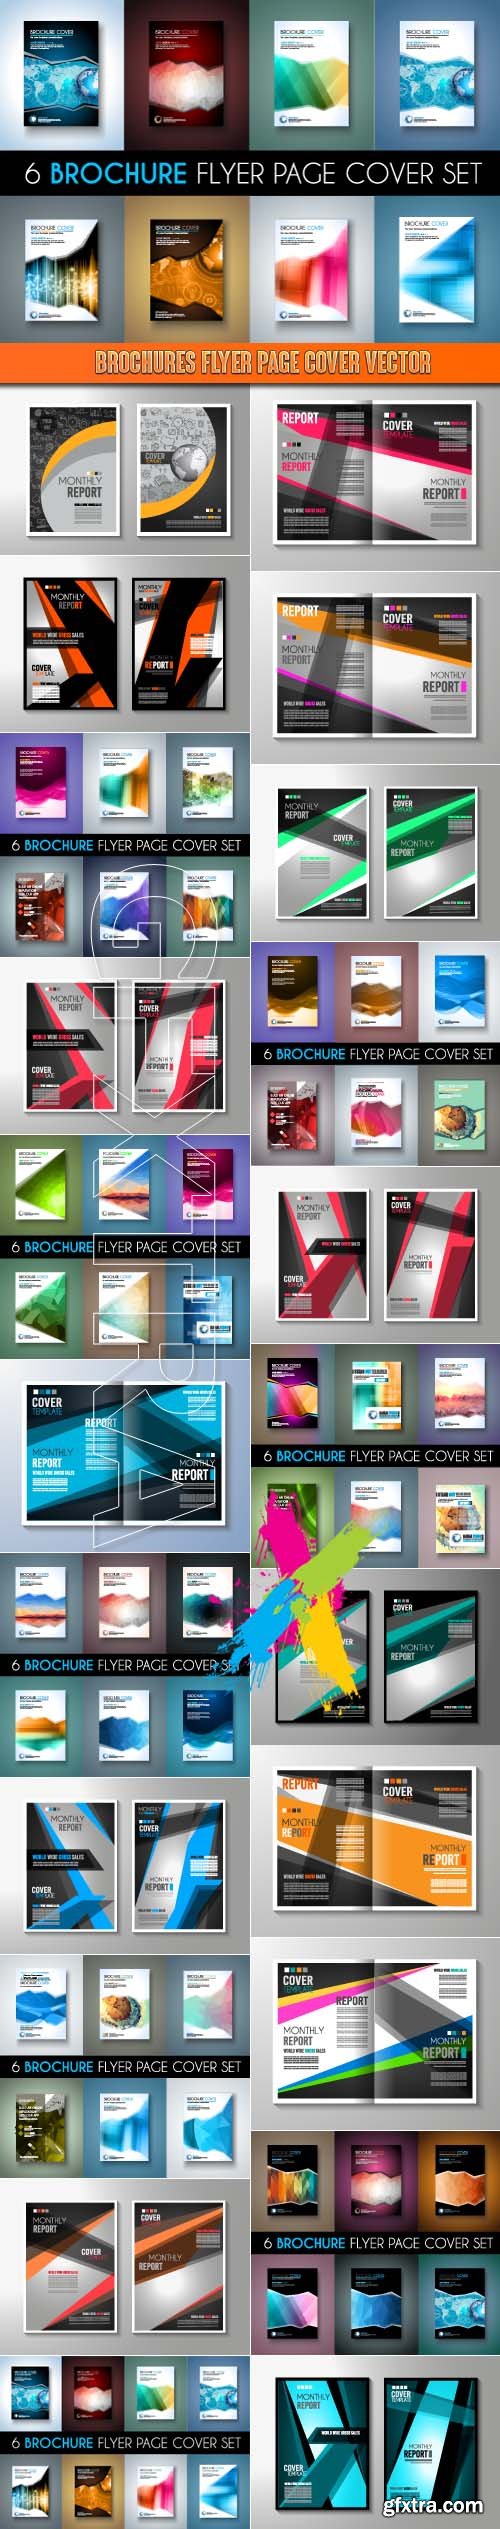 Brochures flyer page cover vector